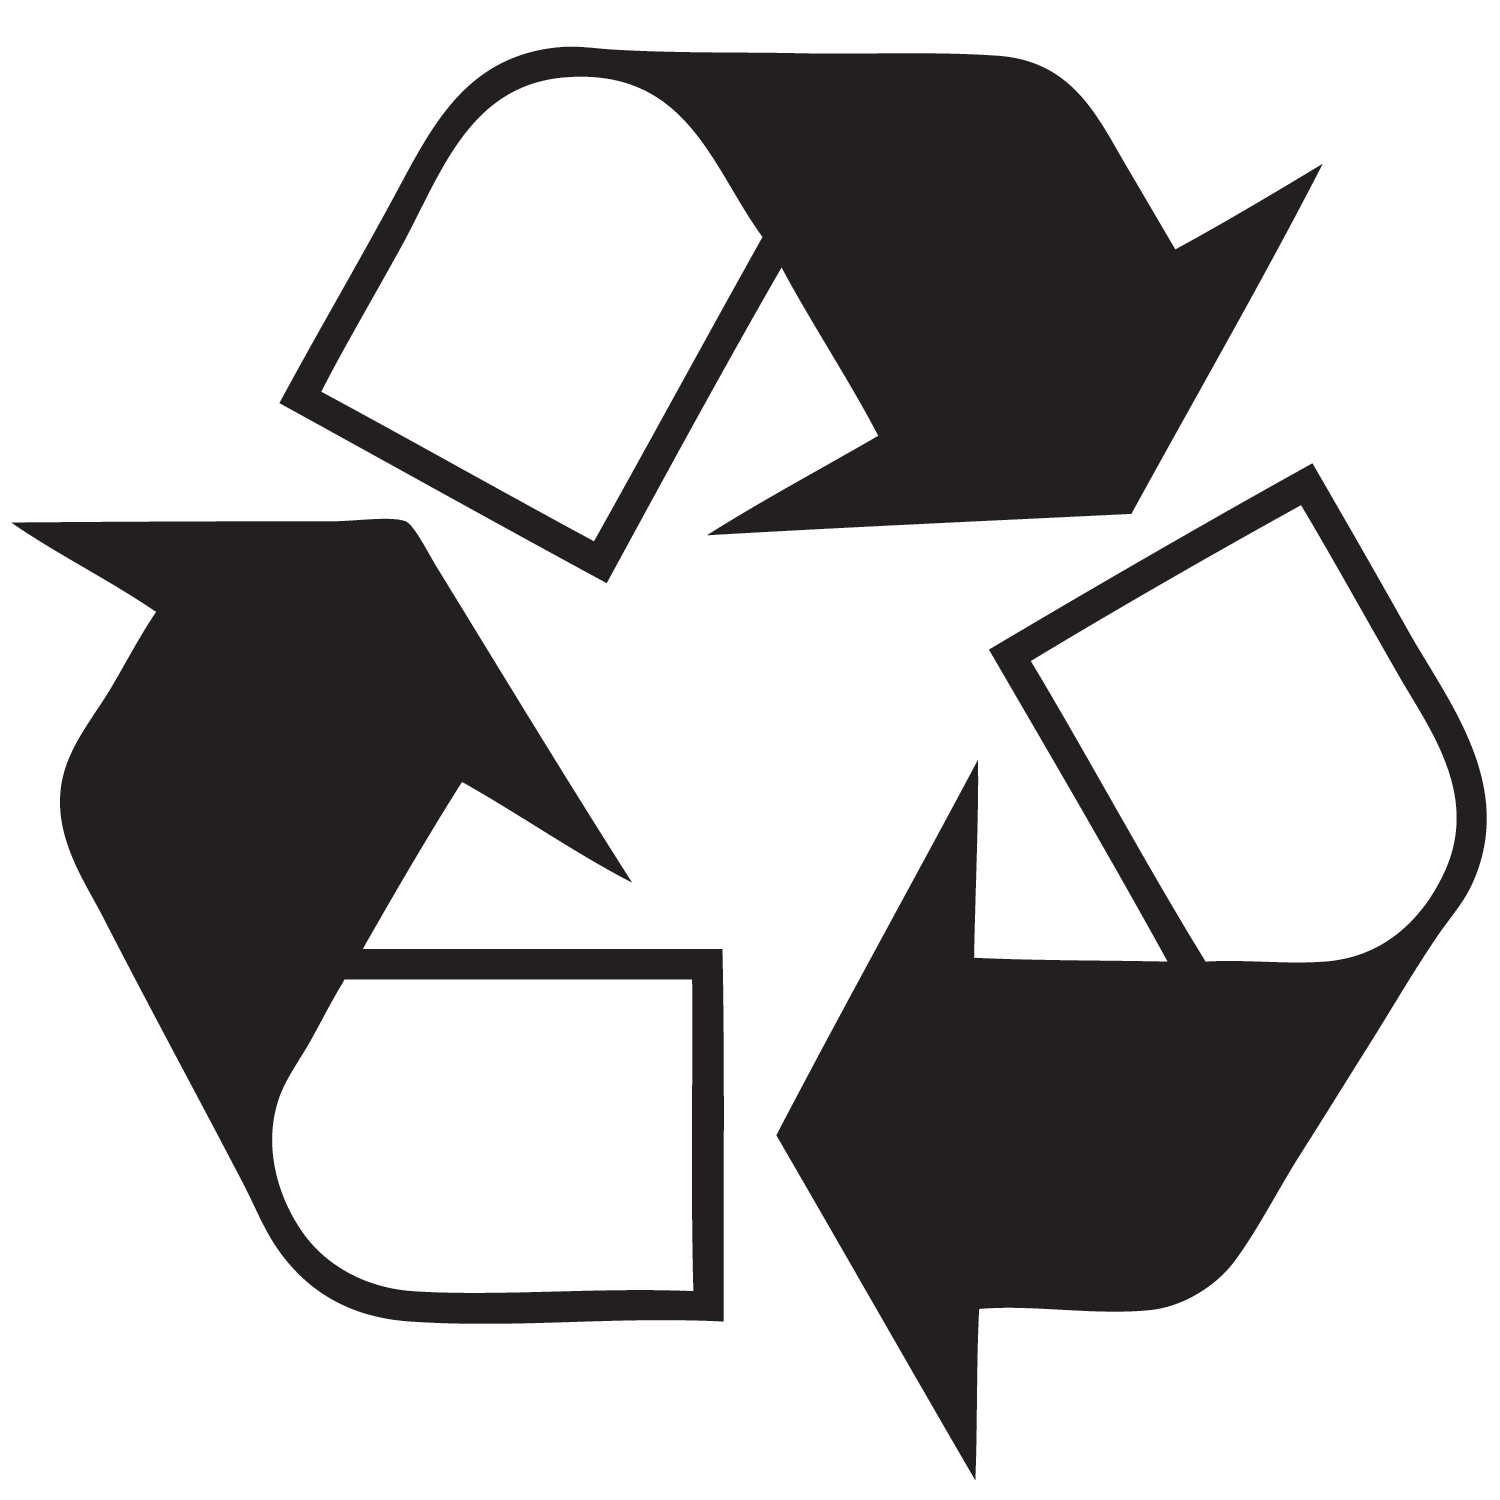 Free Printable Recycling Signs - Clipart library